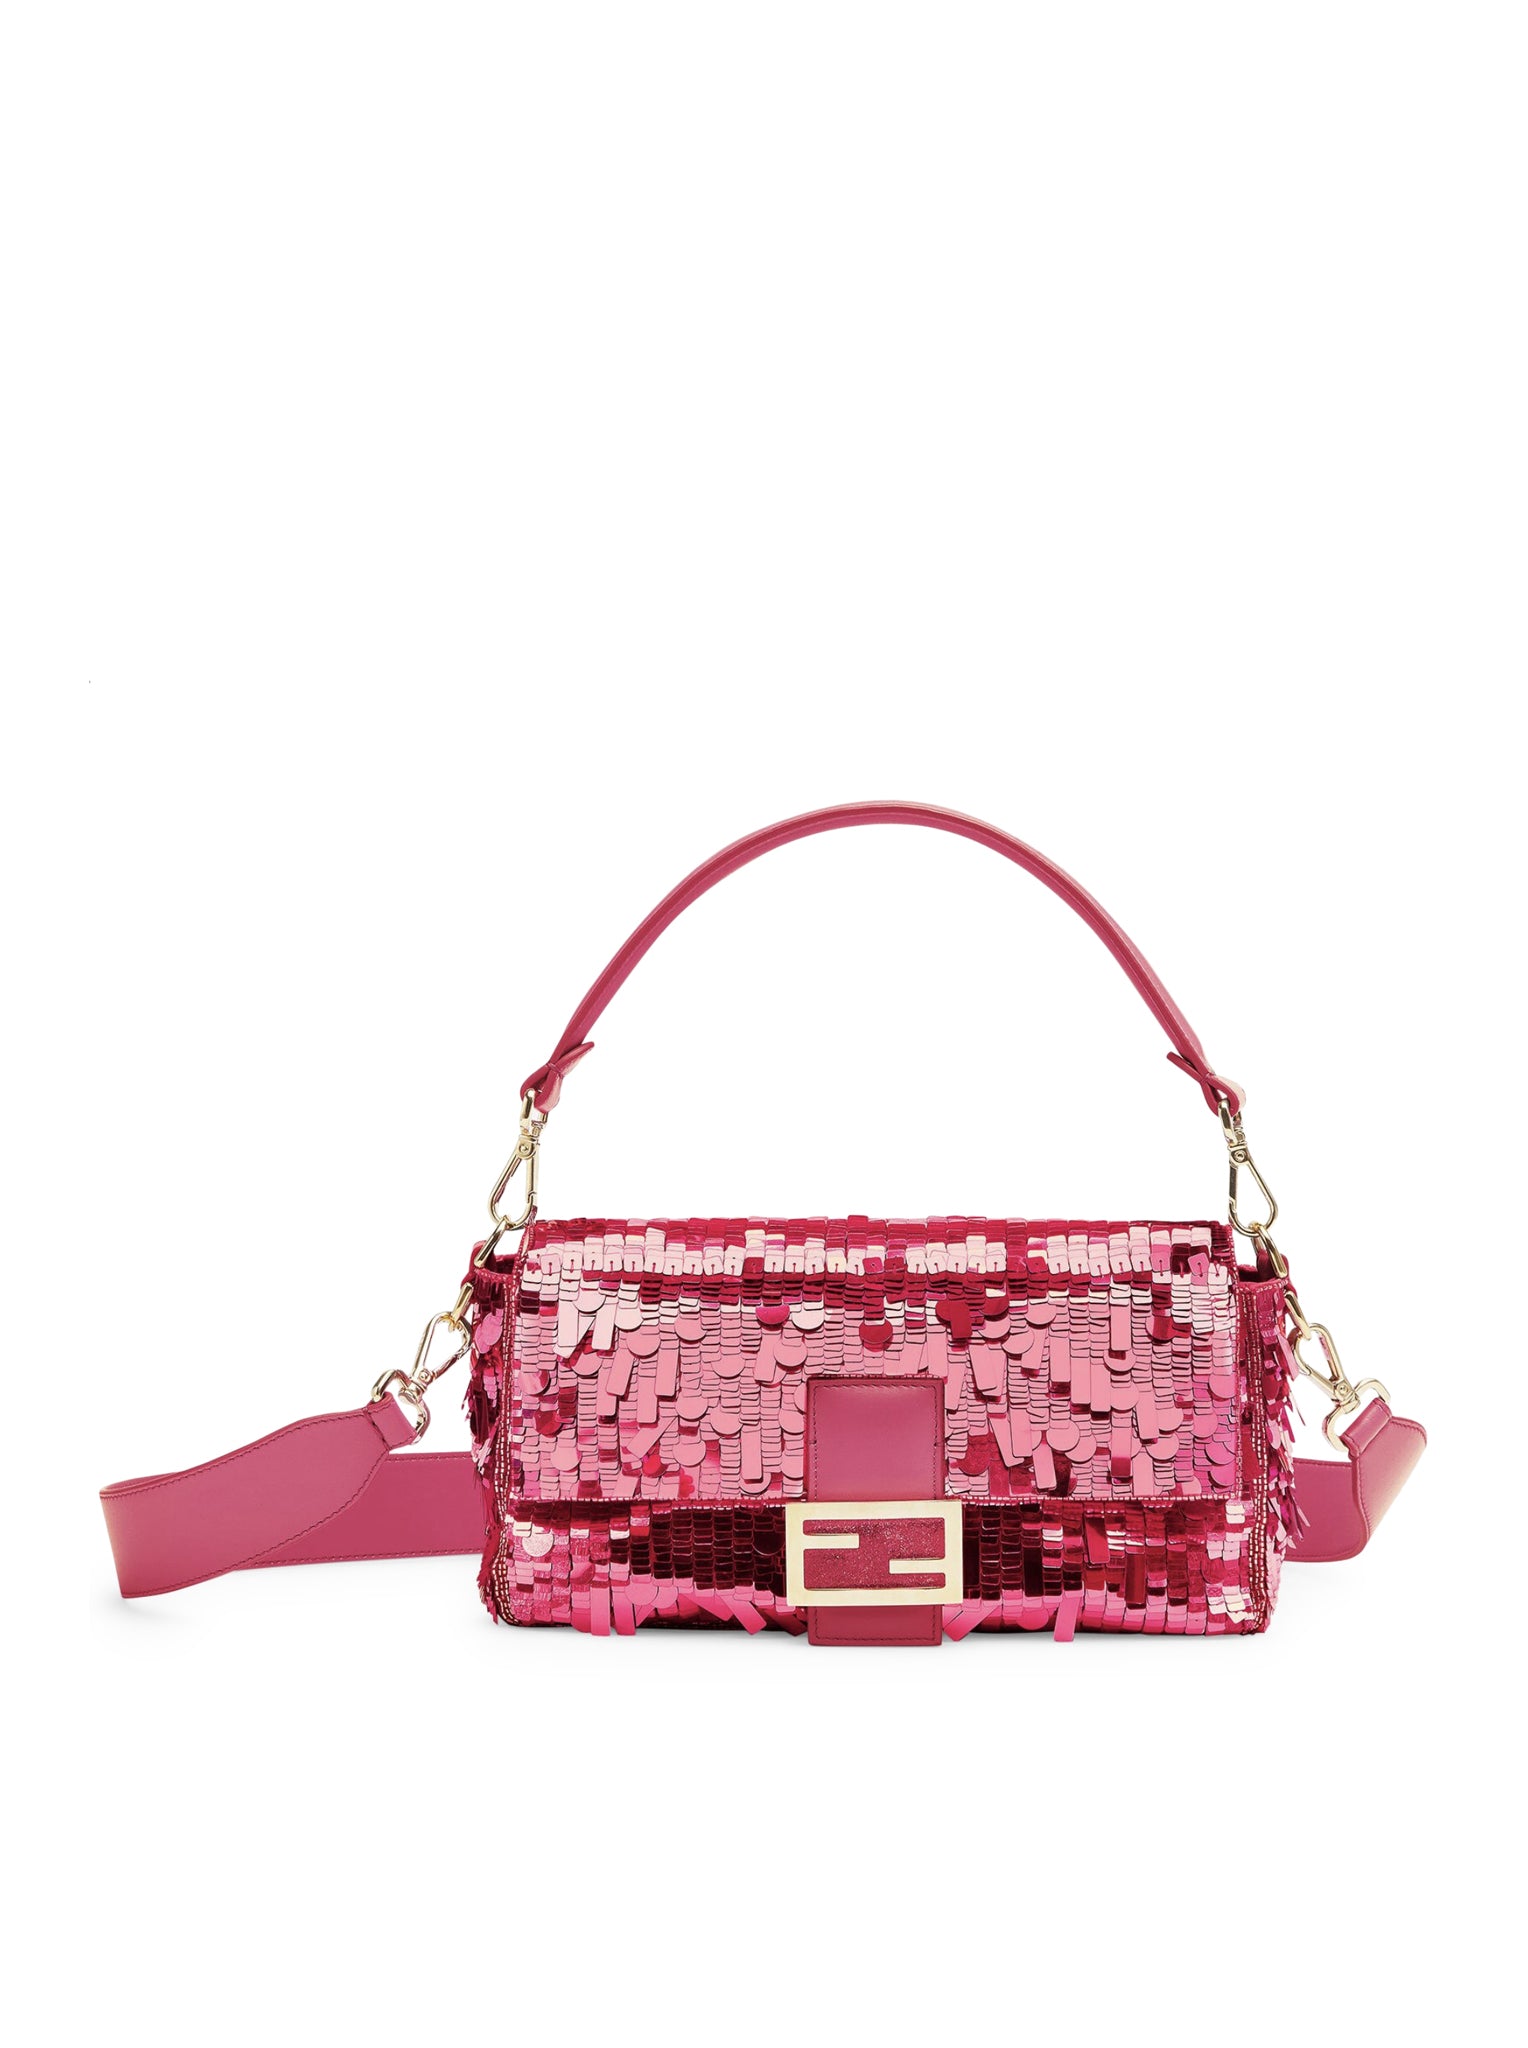 Baguette bag in leather and fuchsia sequins